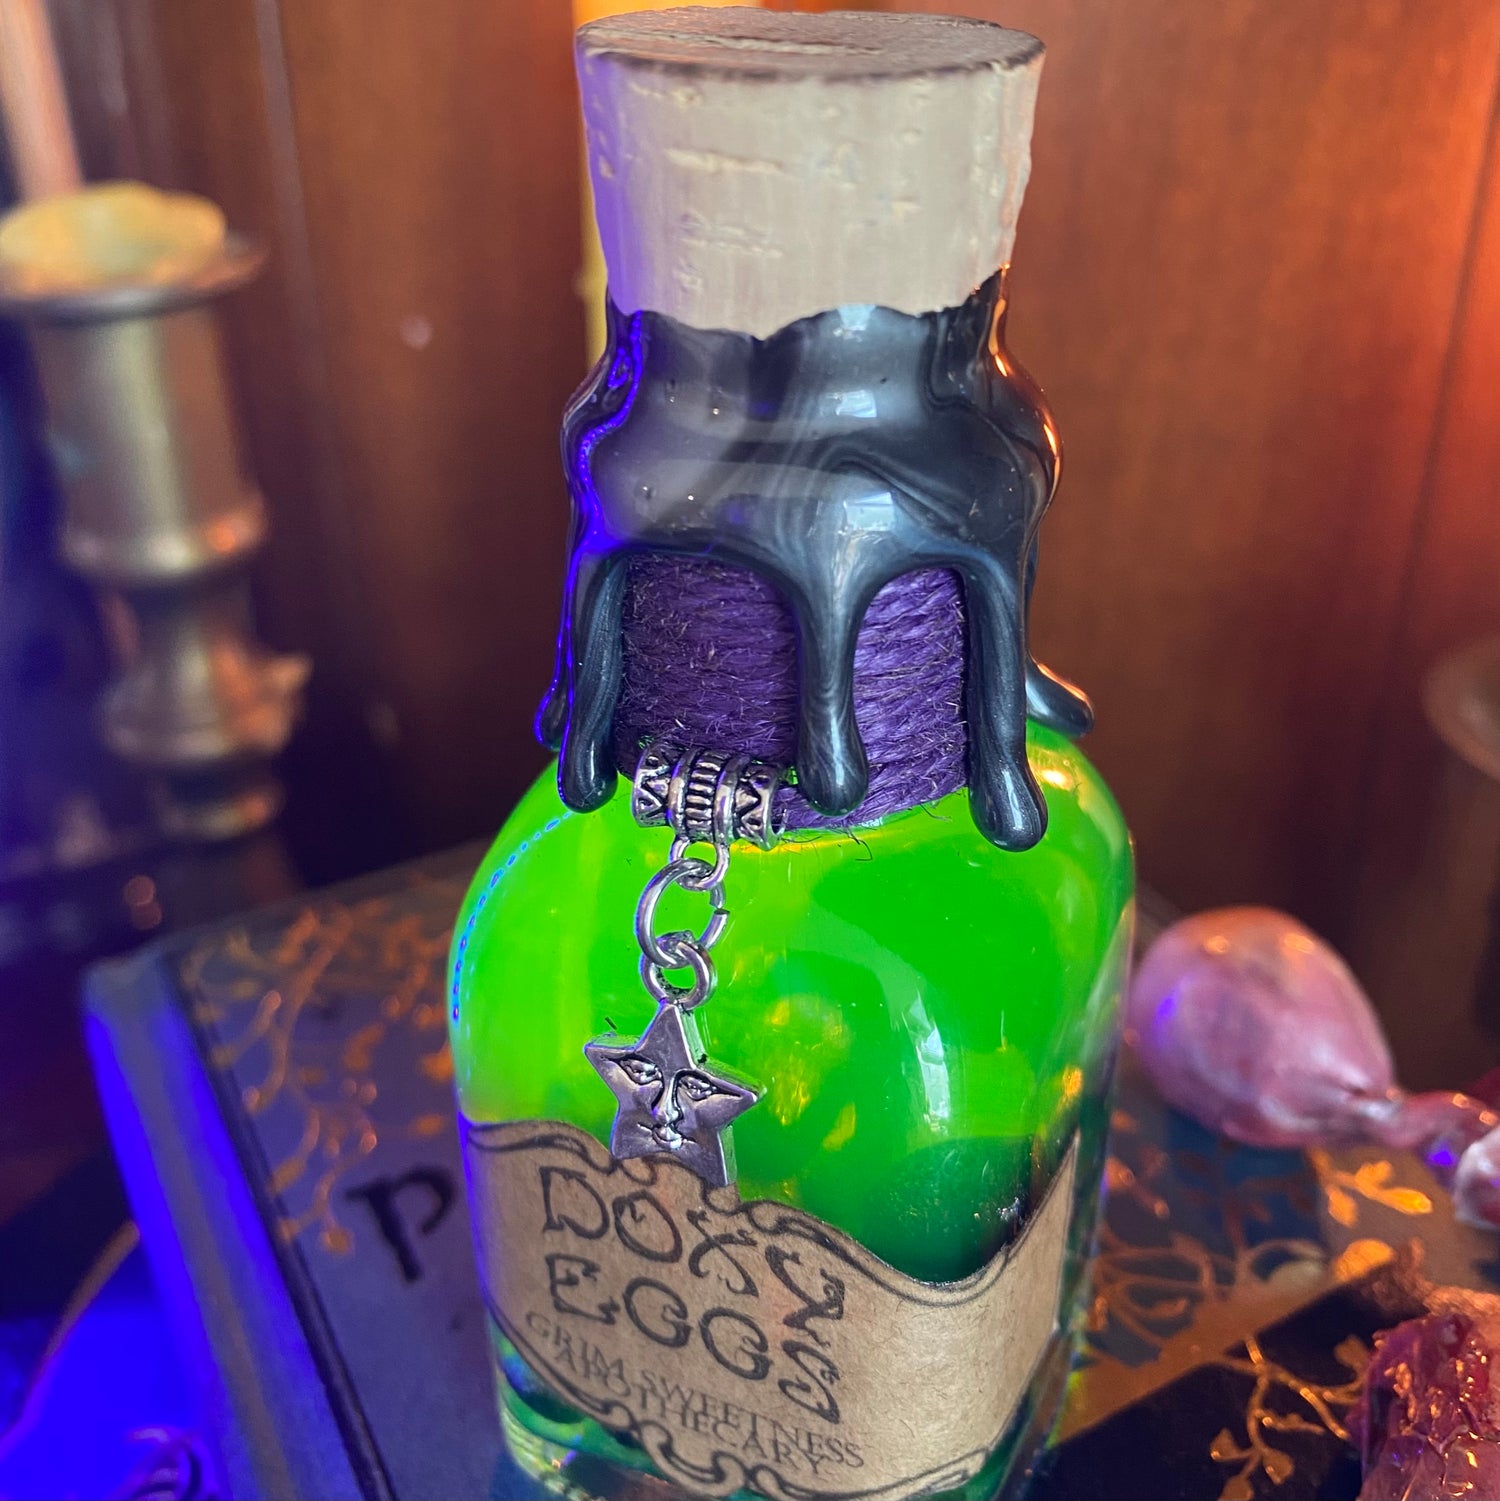 Halloween Small Apothecary Potion Bottles For Harry Potter Decorations Prop